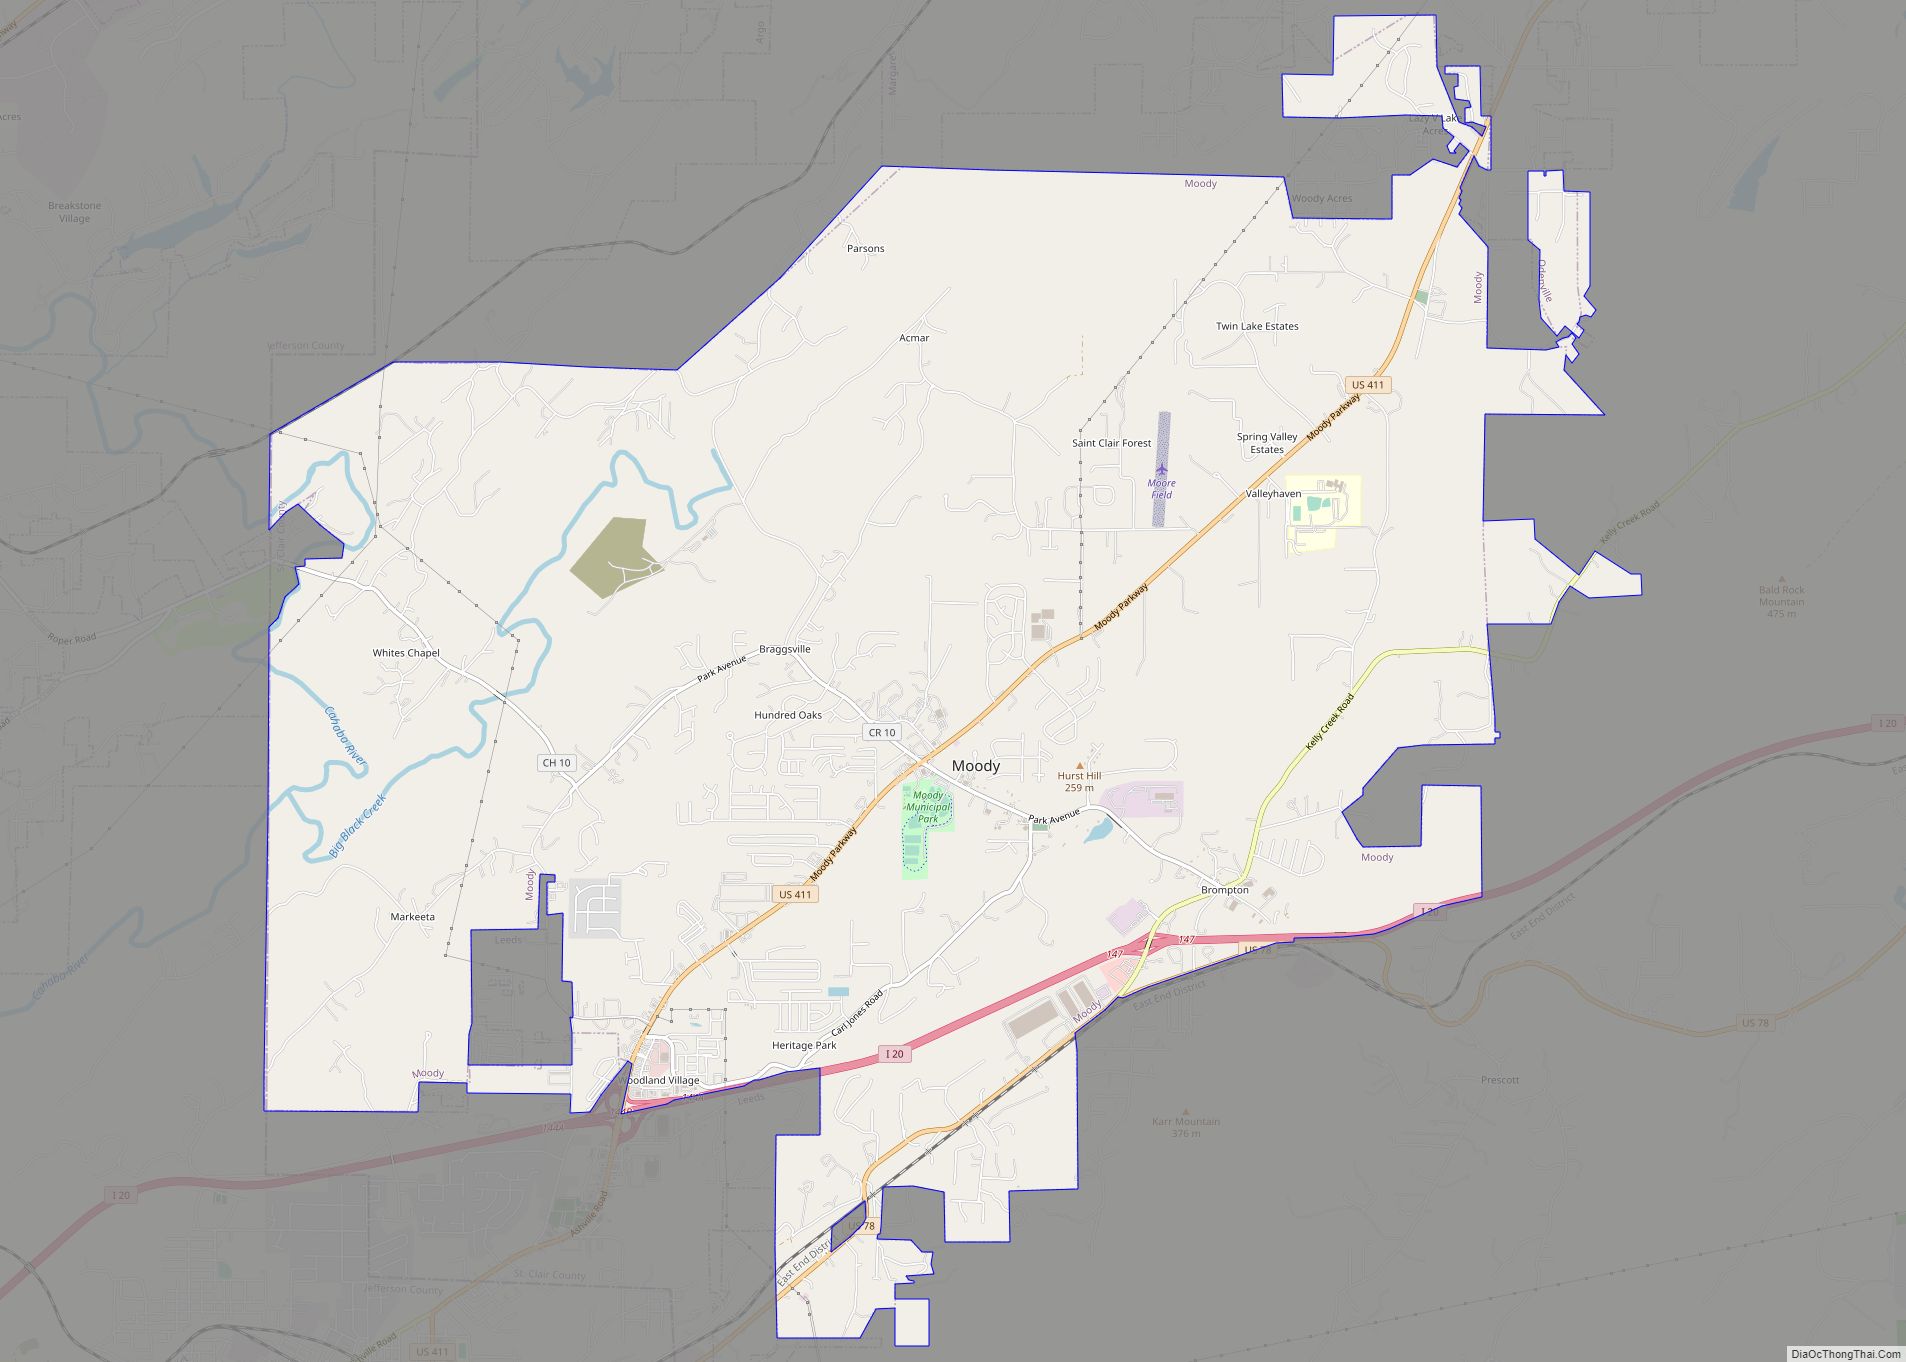 Map of Moody city